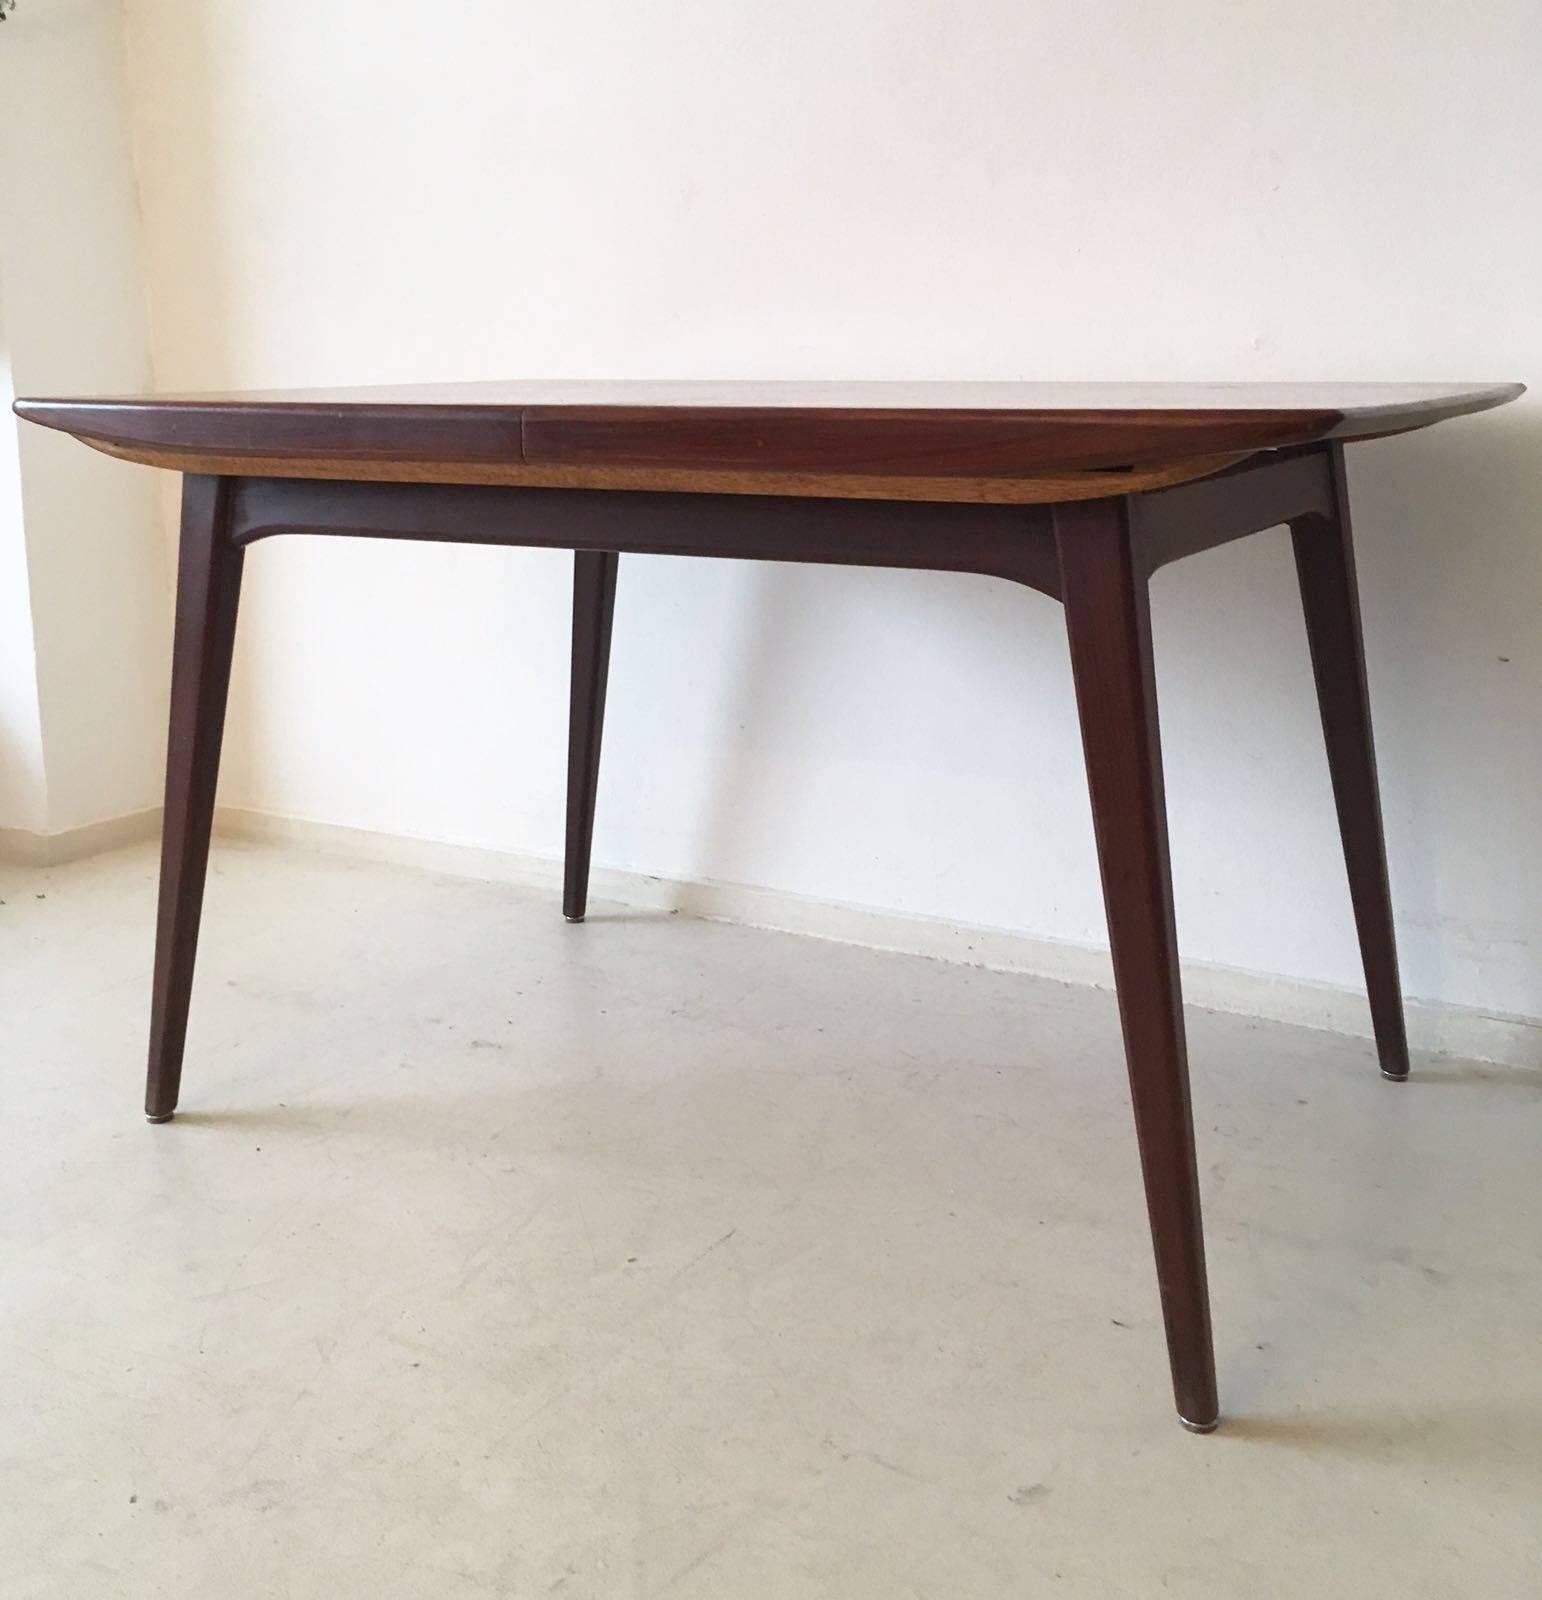 Mid-Century Modern Extendable dining table by Louis van Teeffelen for Webe, 1960s